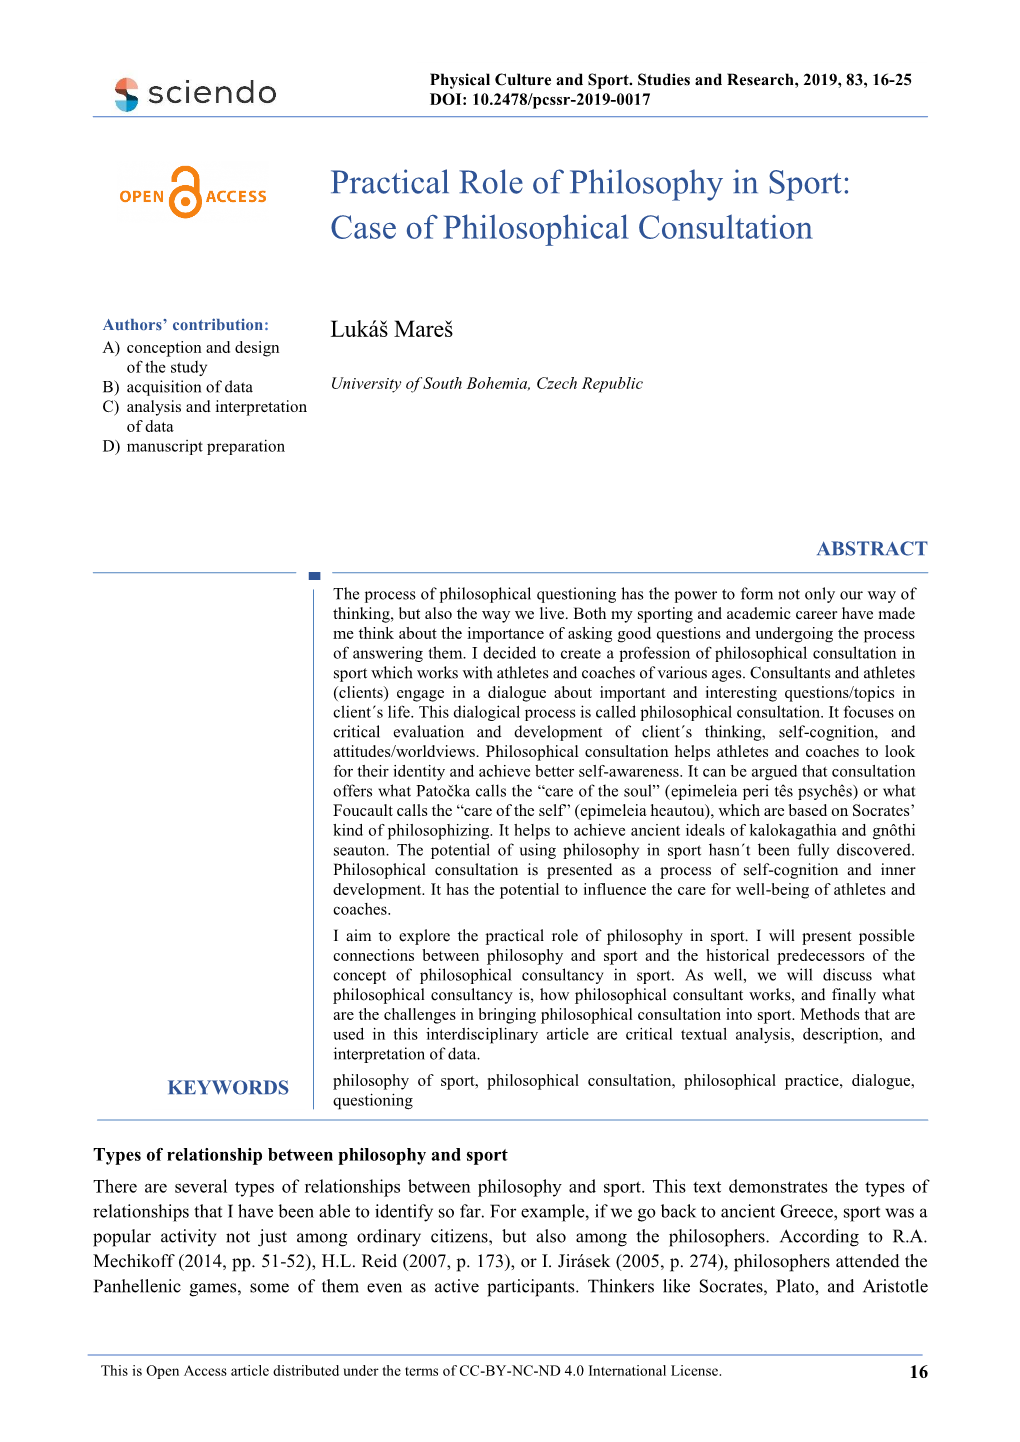 Practical Role of Philosophy in Sport: Case of Philosophical Consultation